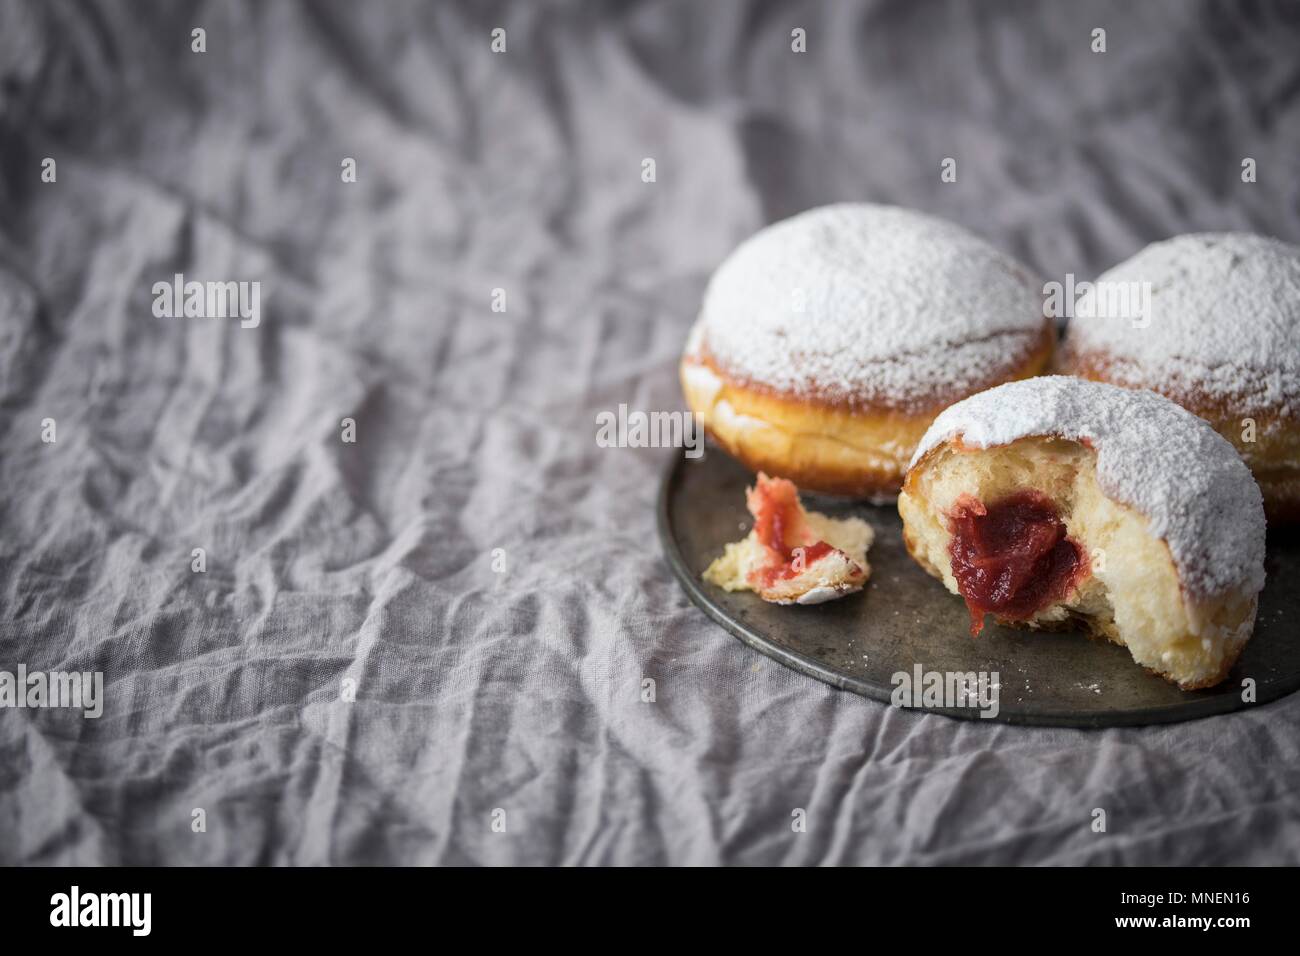 Fancy Goods Products High Resolution Stock Photography and Images - Alamy